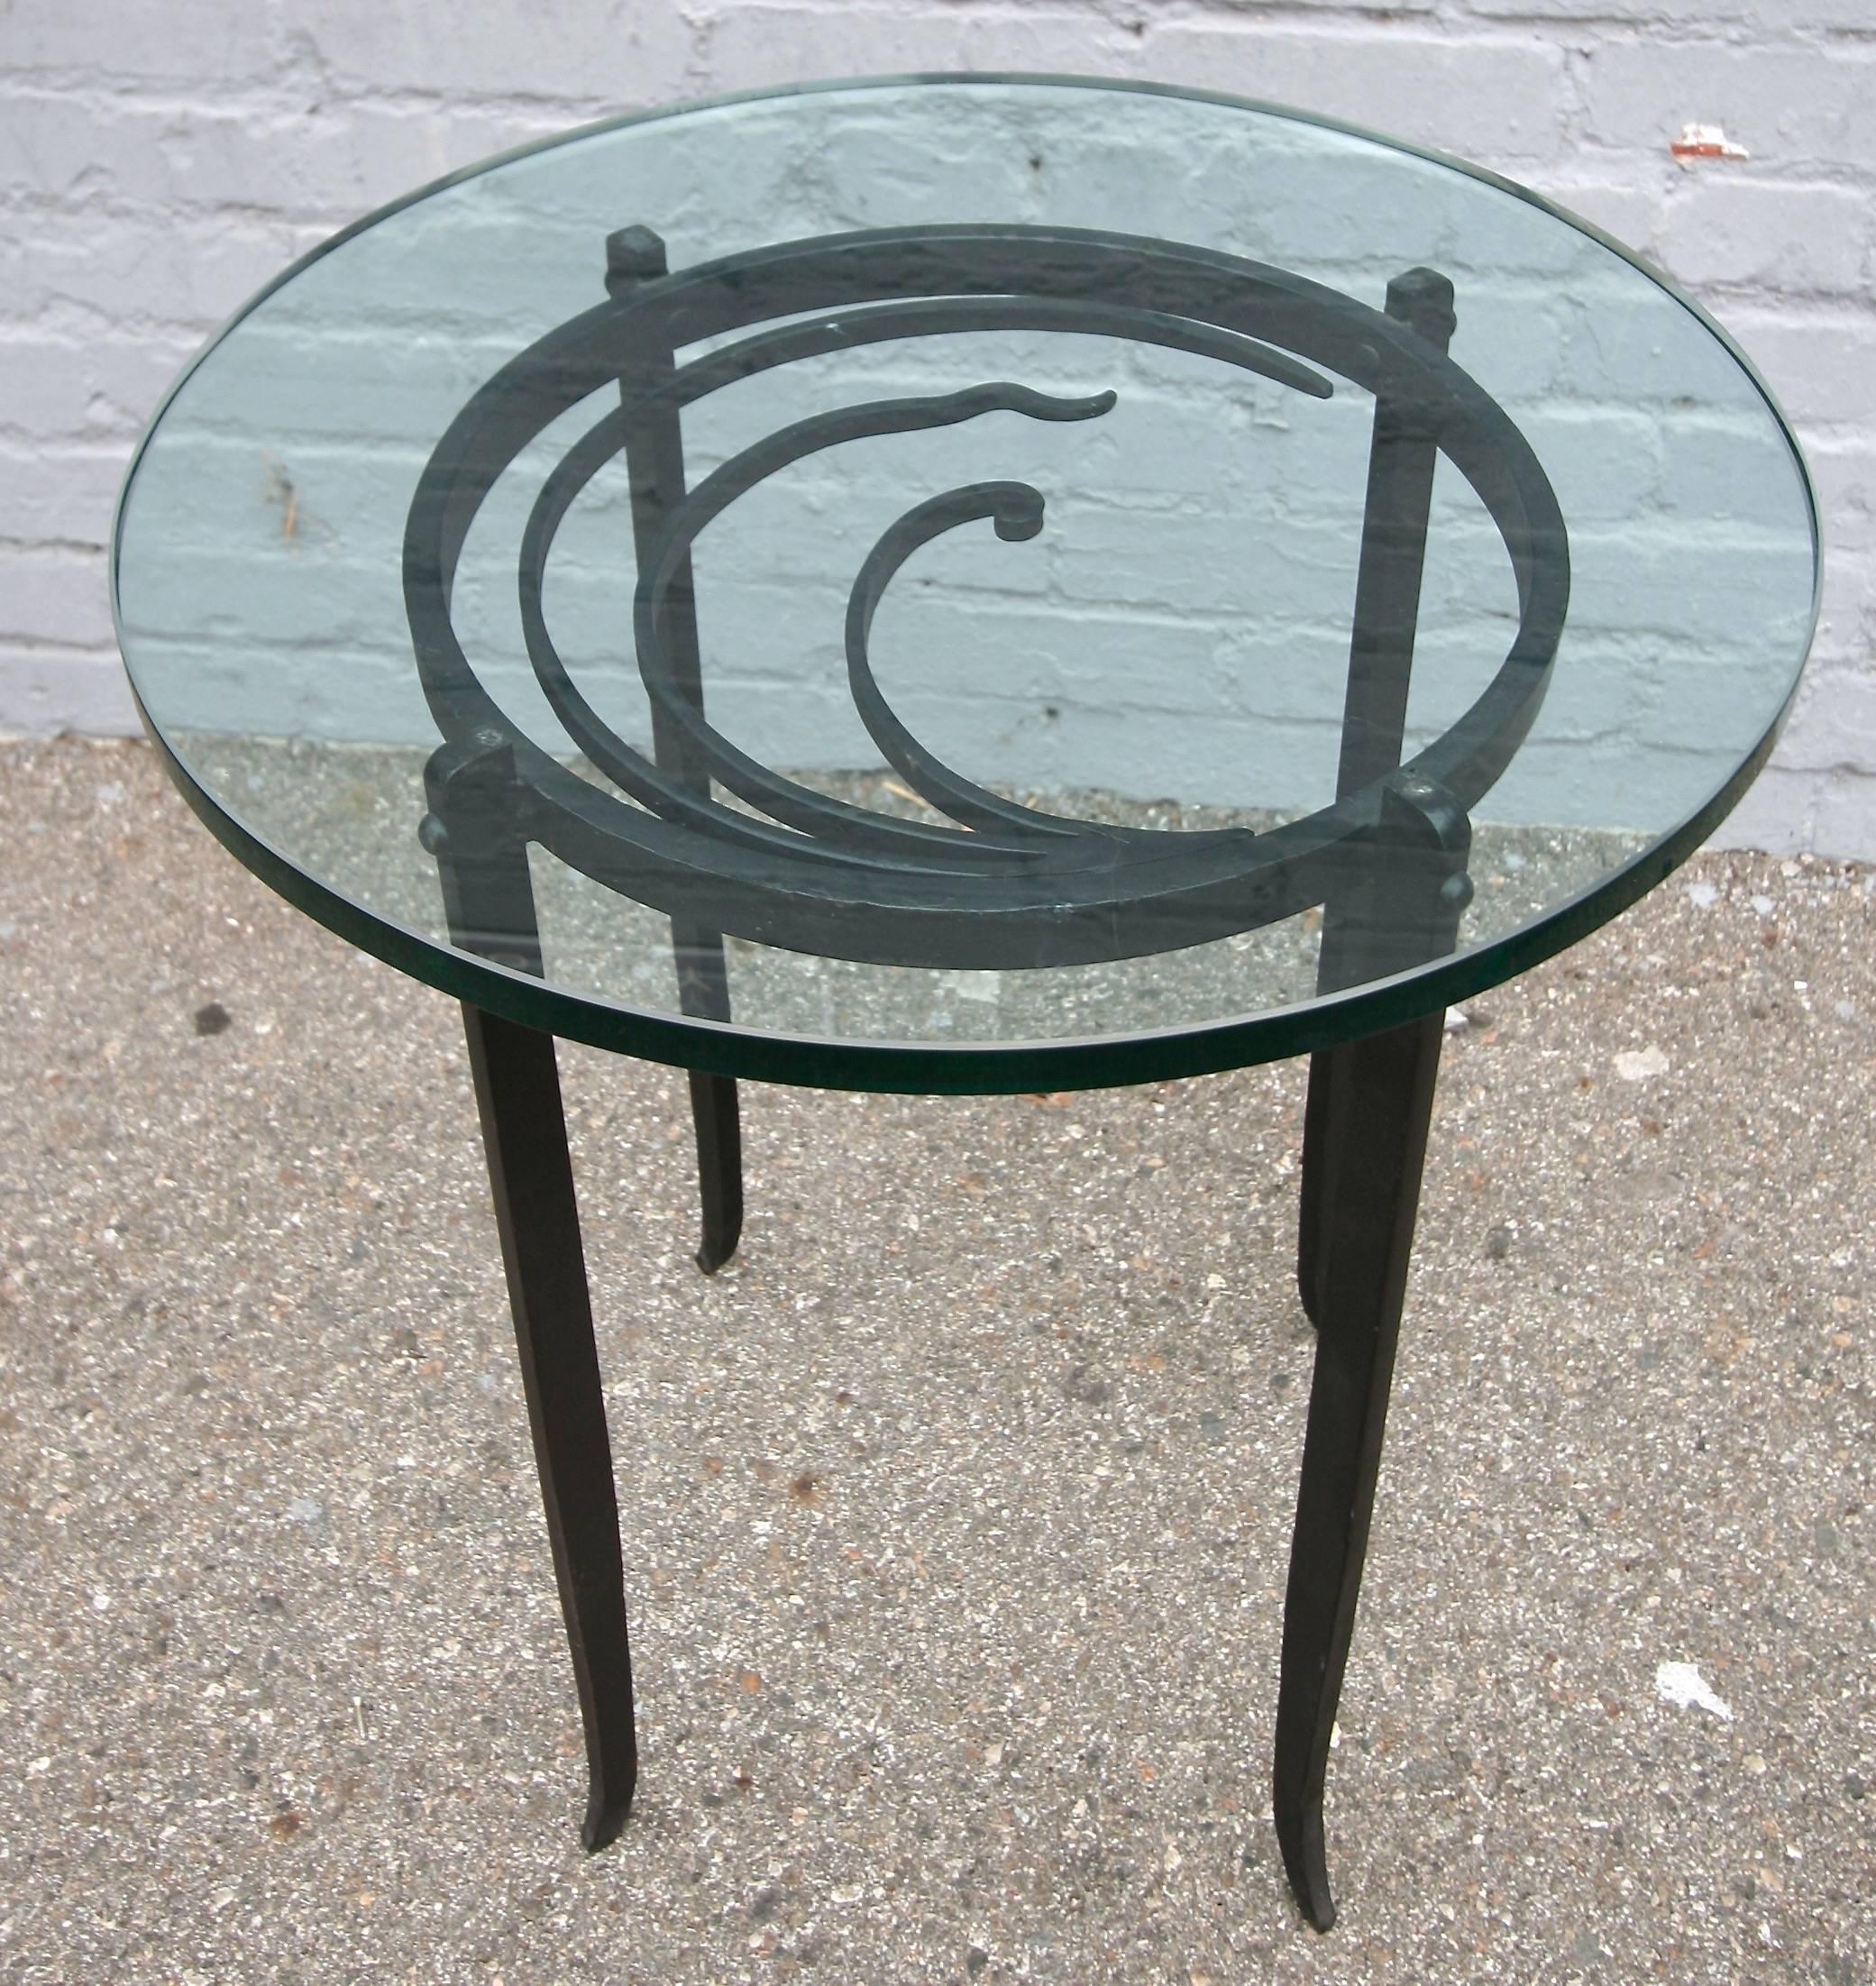 Pair of 1940s Art Deco side tables with beautifully detailed iron base and glass top.